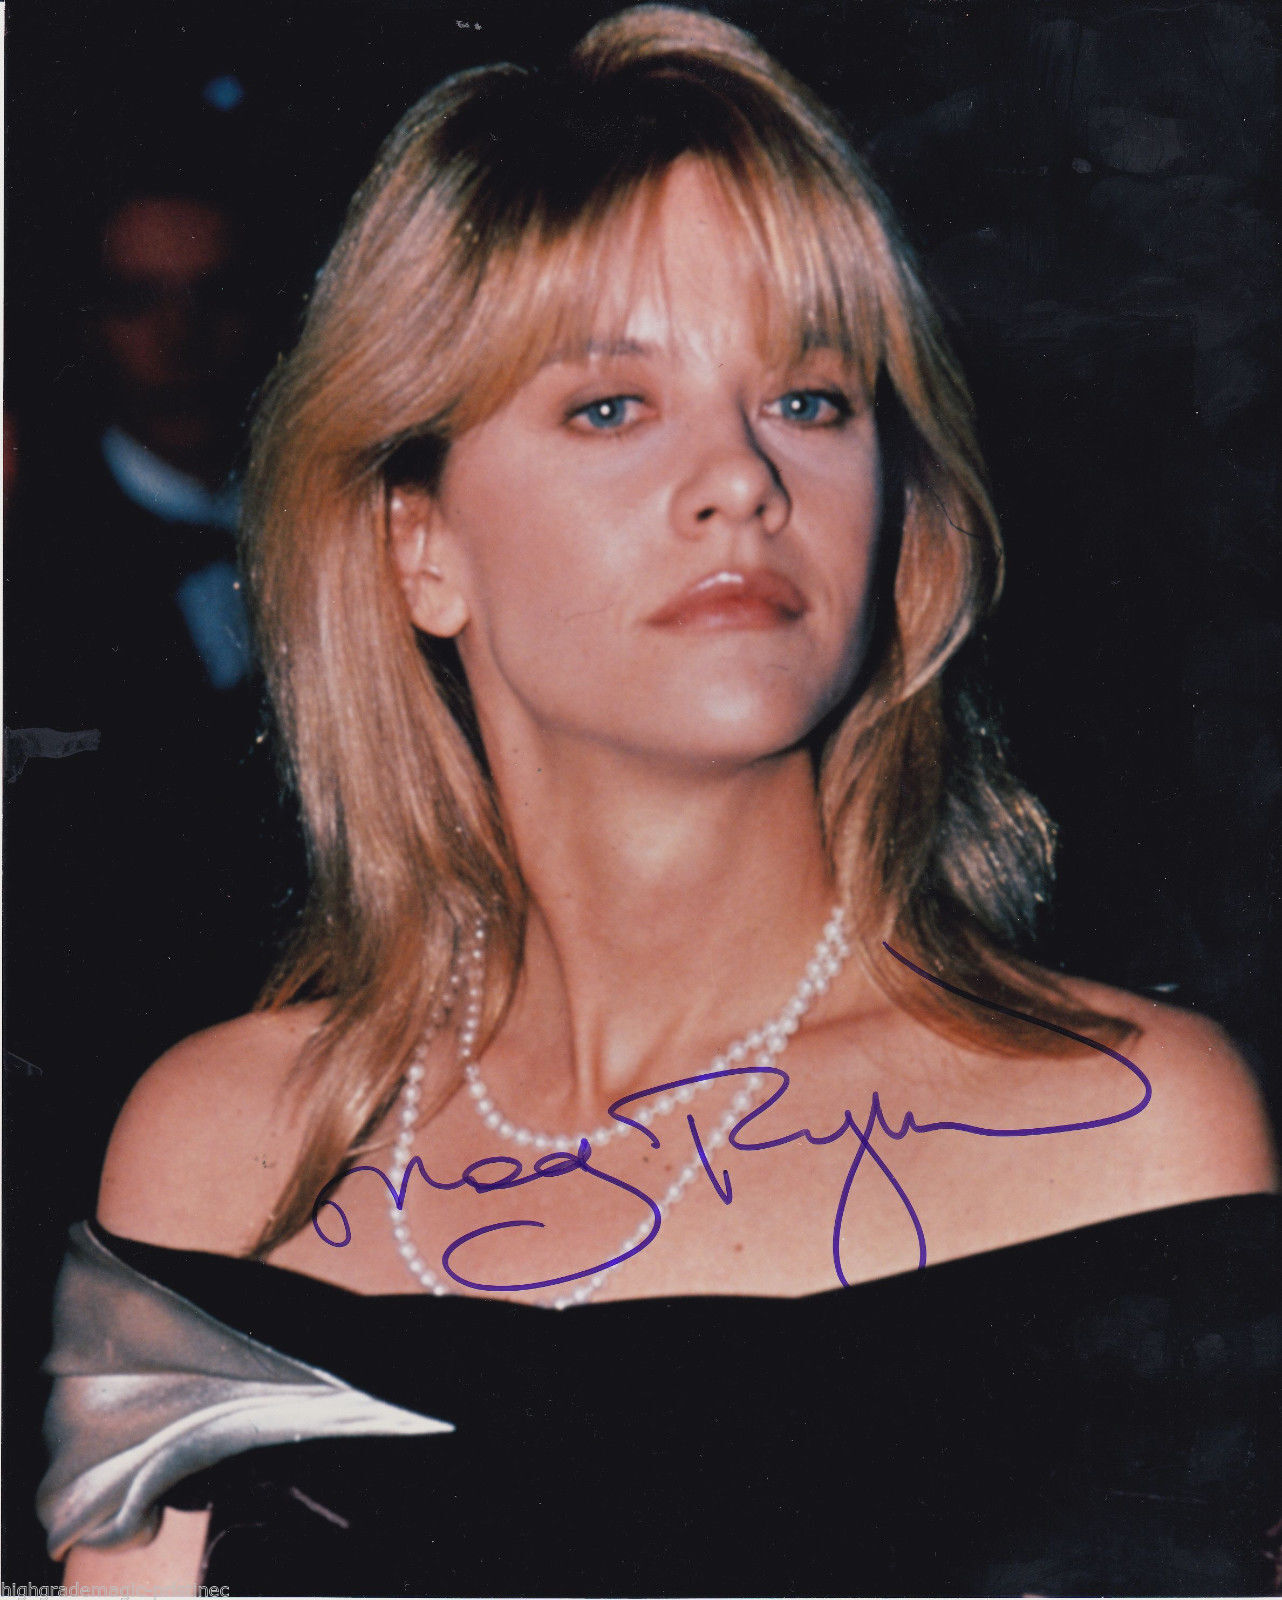 MEG RYAN, ACTRESS WITH PEARLS SIGNED 8X10 STUDIO PROMO Photo Poster painting WITH COA